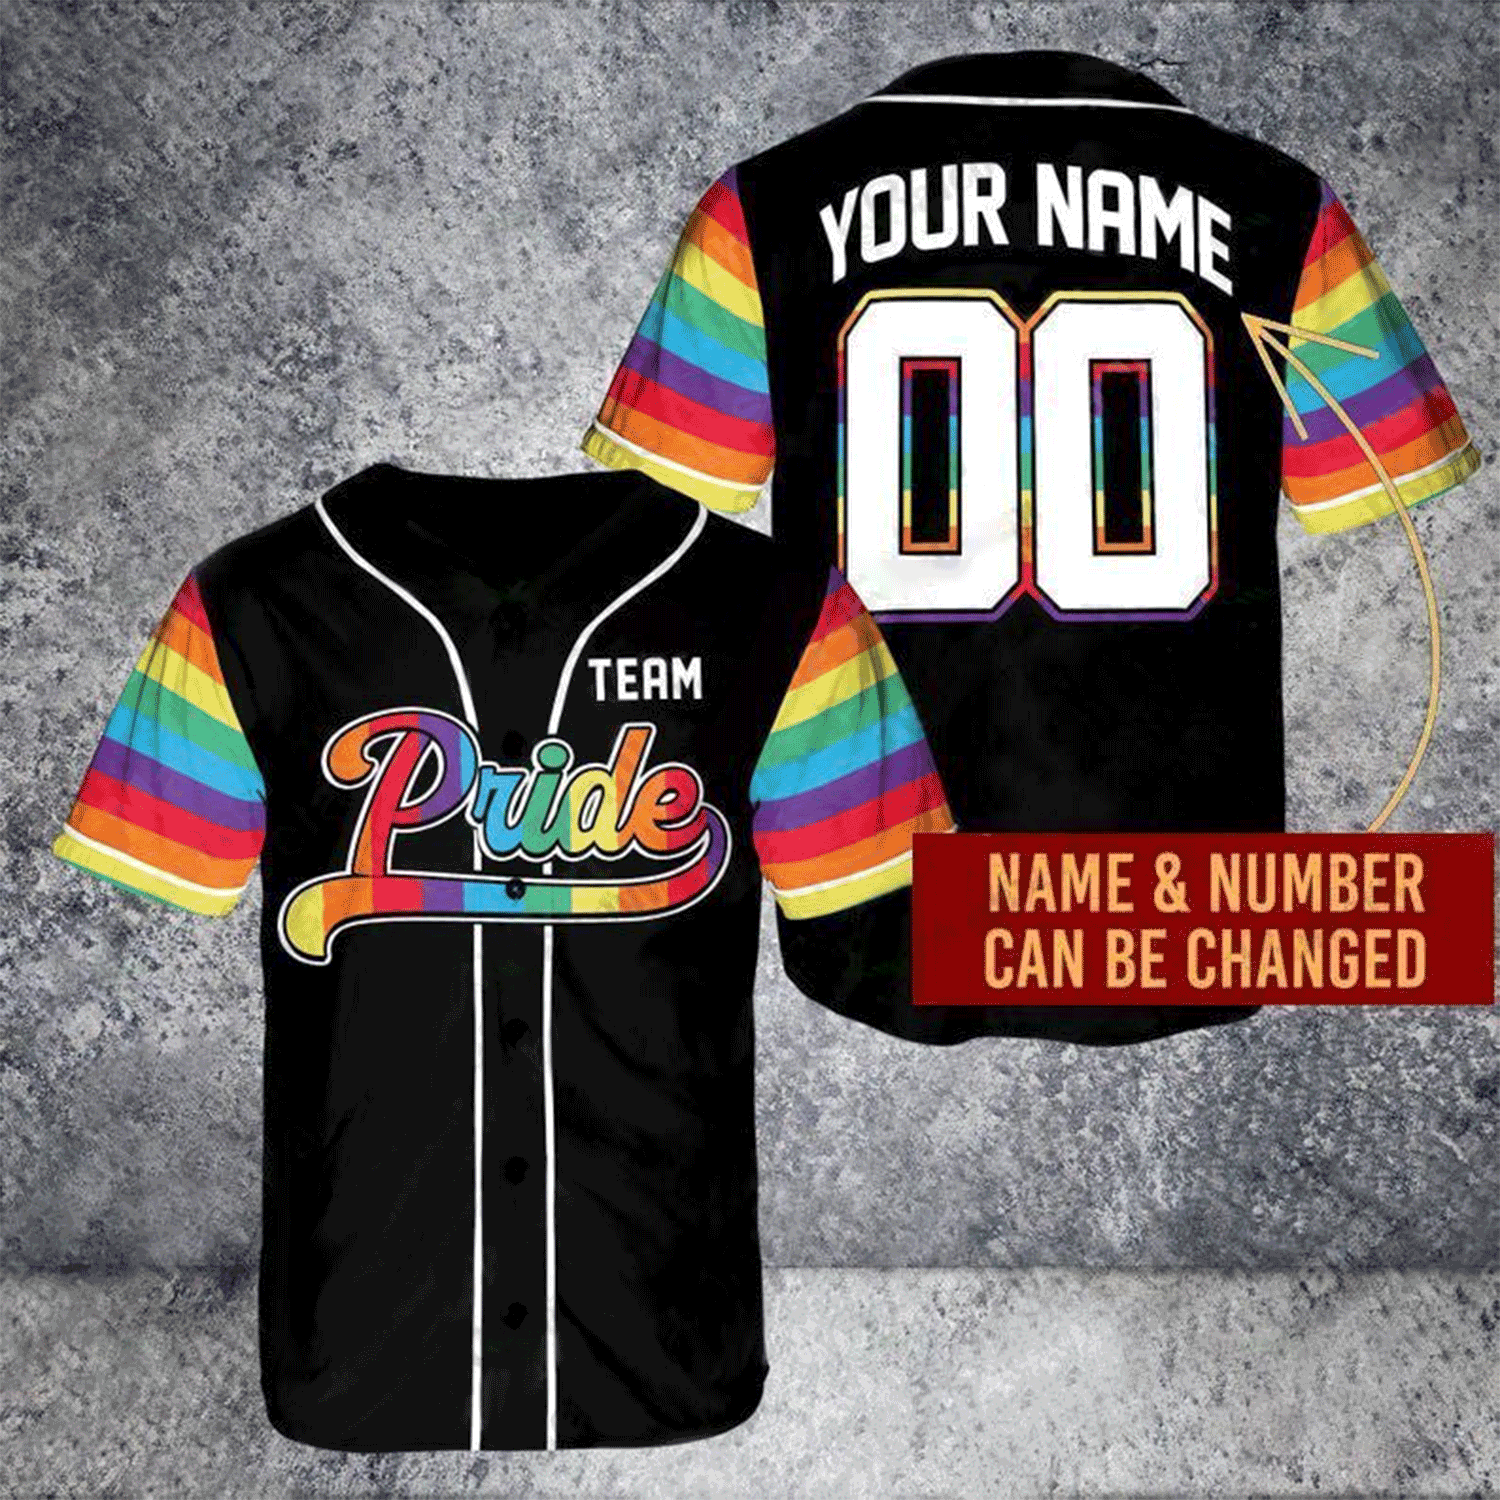 Customized LGBT Baseball Jersey Shirt - LGBT Pride Personalized Name and Number Baseball Jersey Shirt For Juneteenth